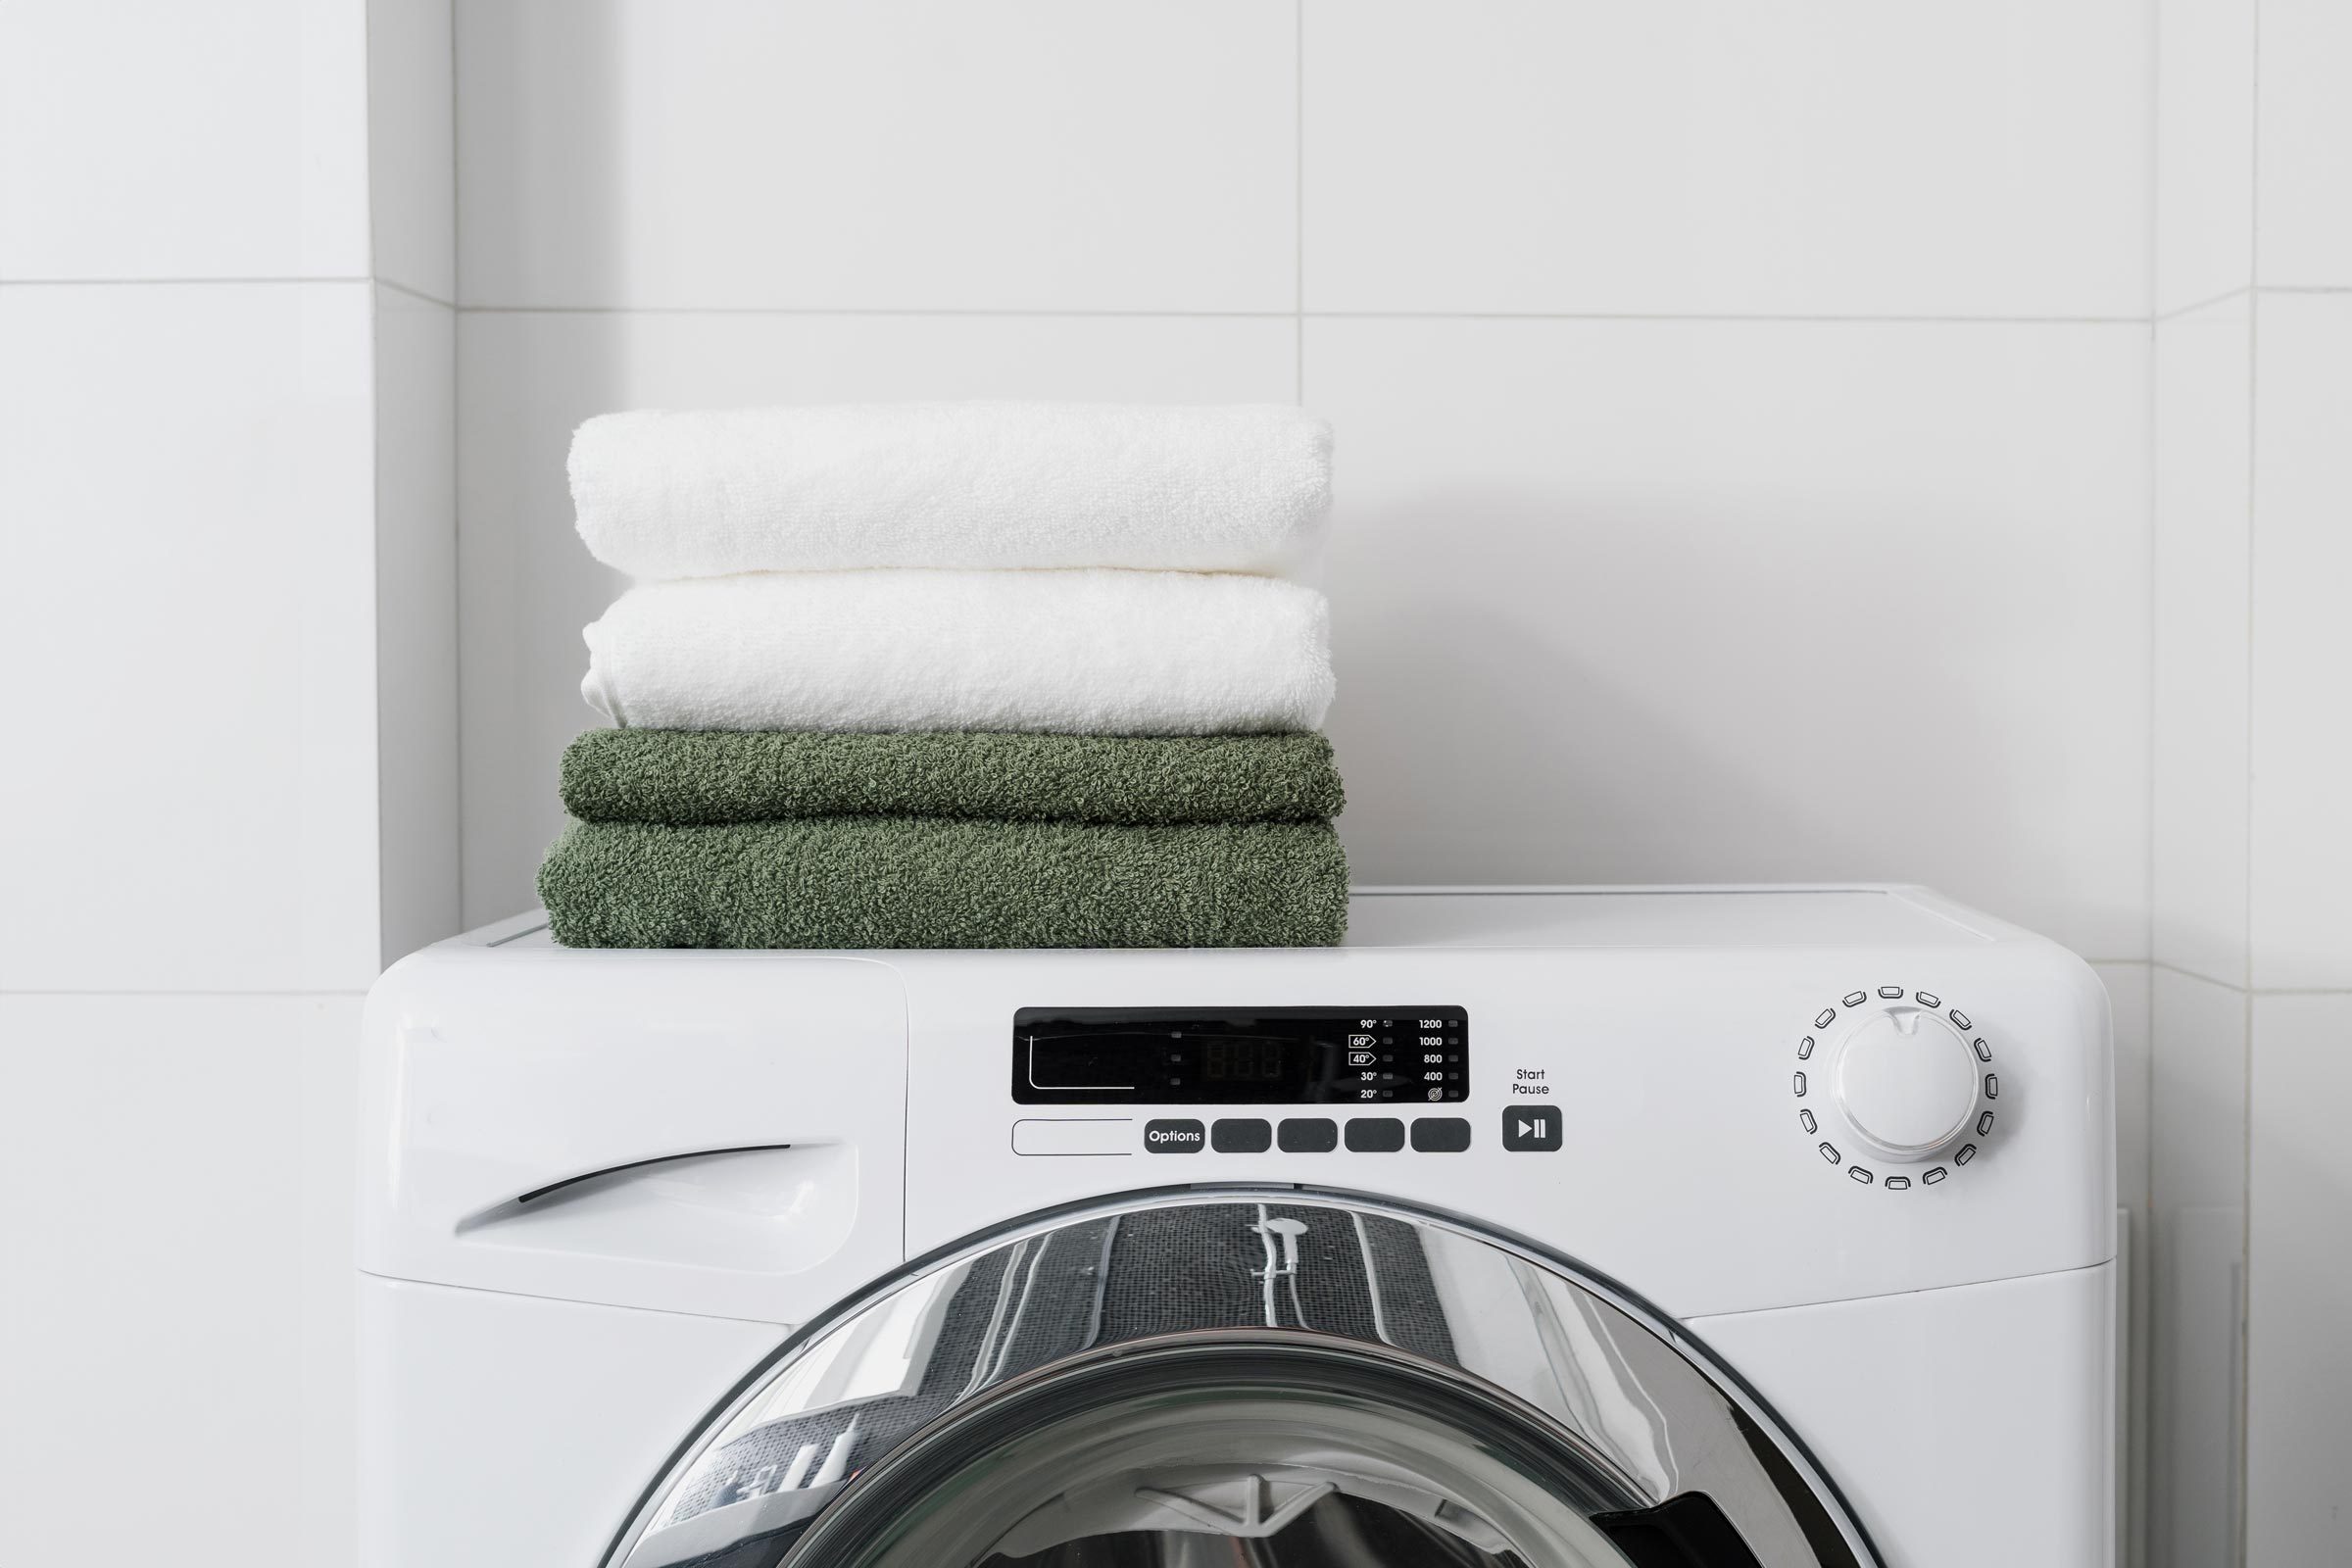 How to Wash and Dry Bath Towels